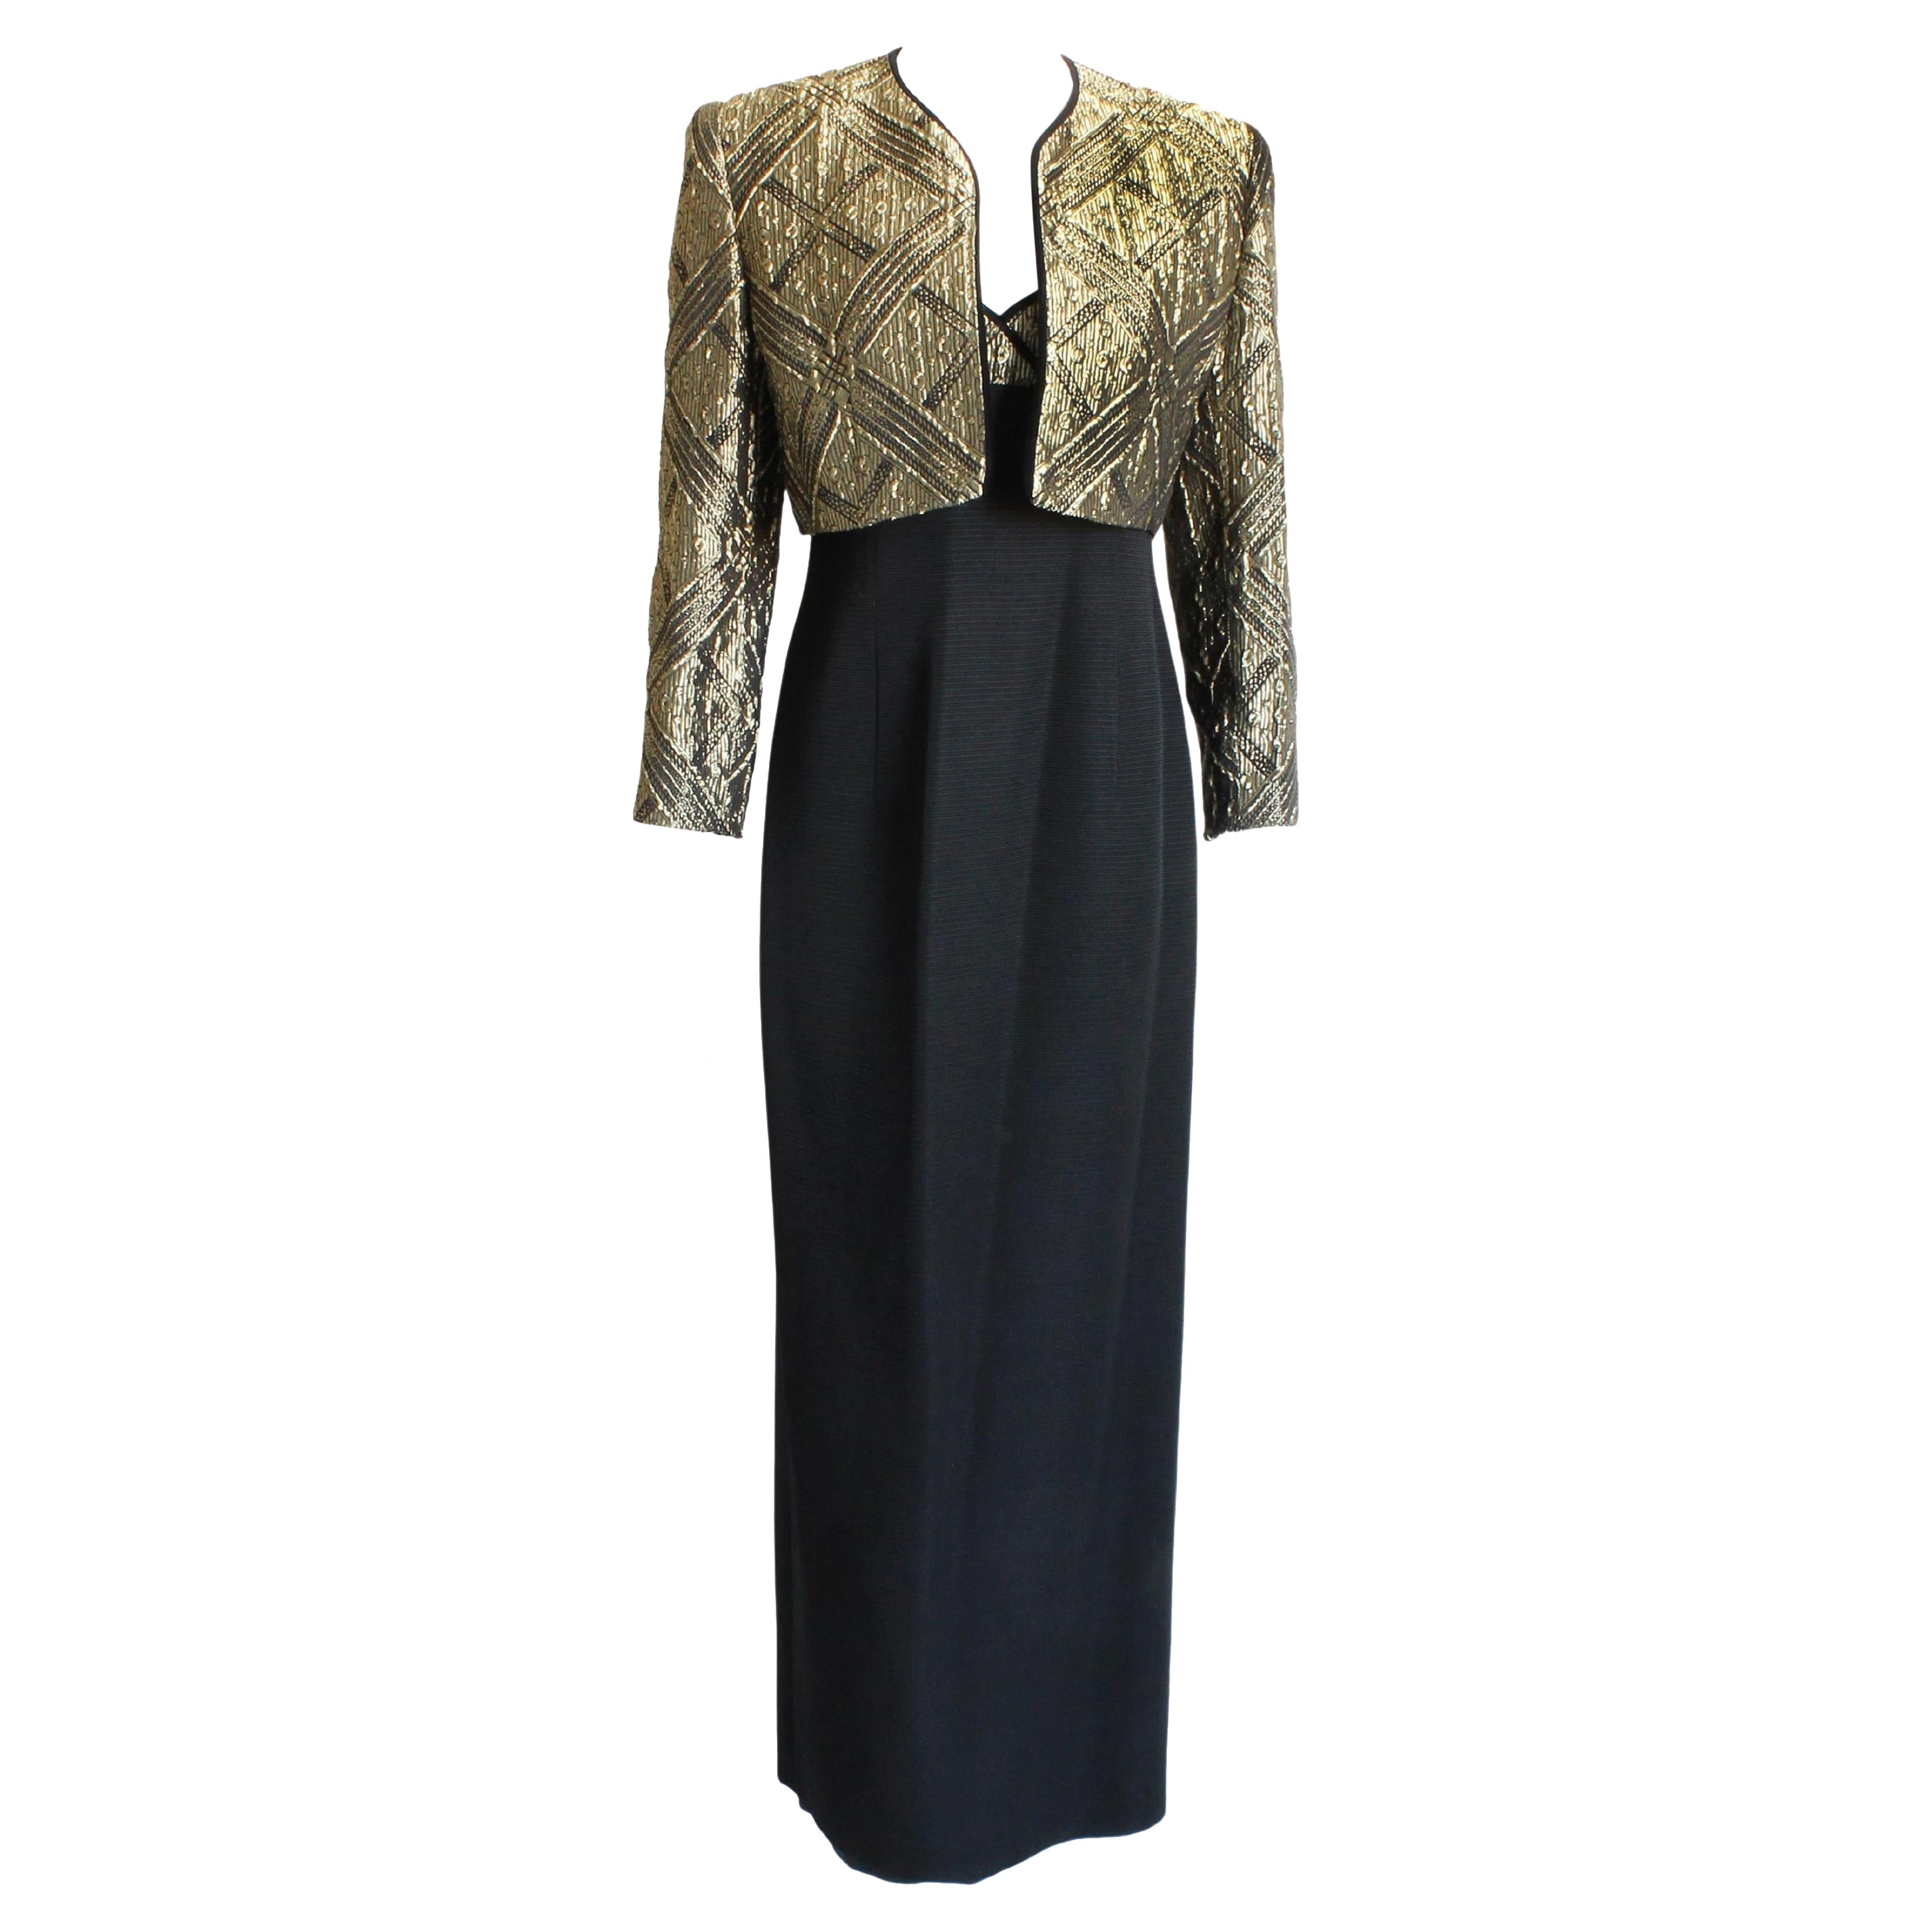 Louis Feraud Evening Gown and Jacket 2pc Long Gold Metallic Brocade Vintage 90s  For Sale